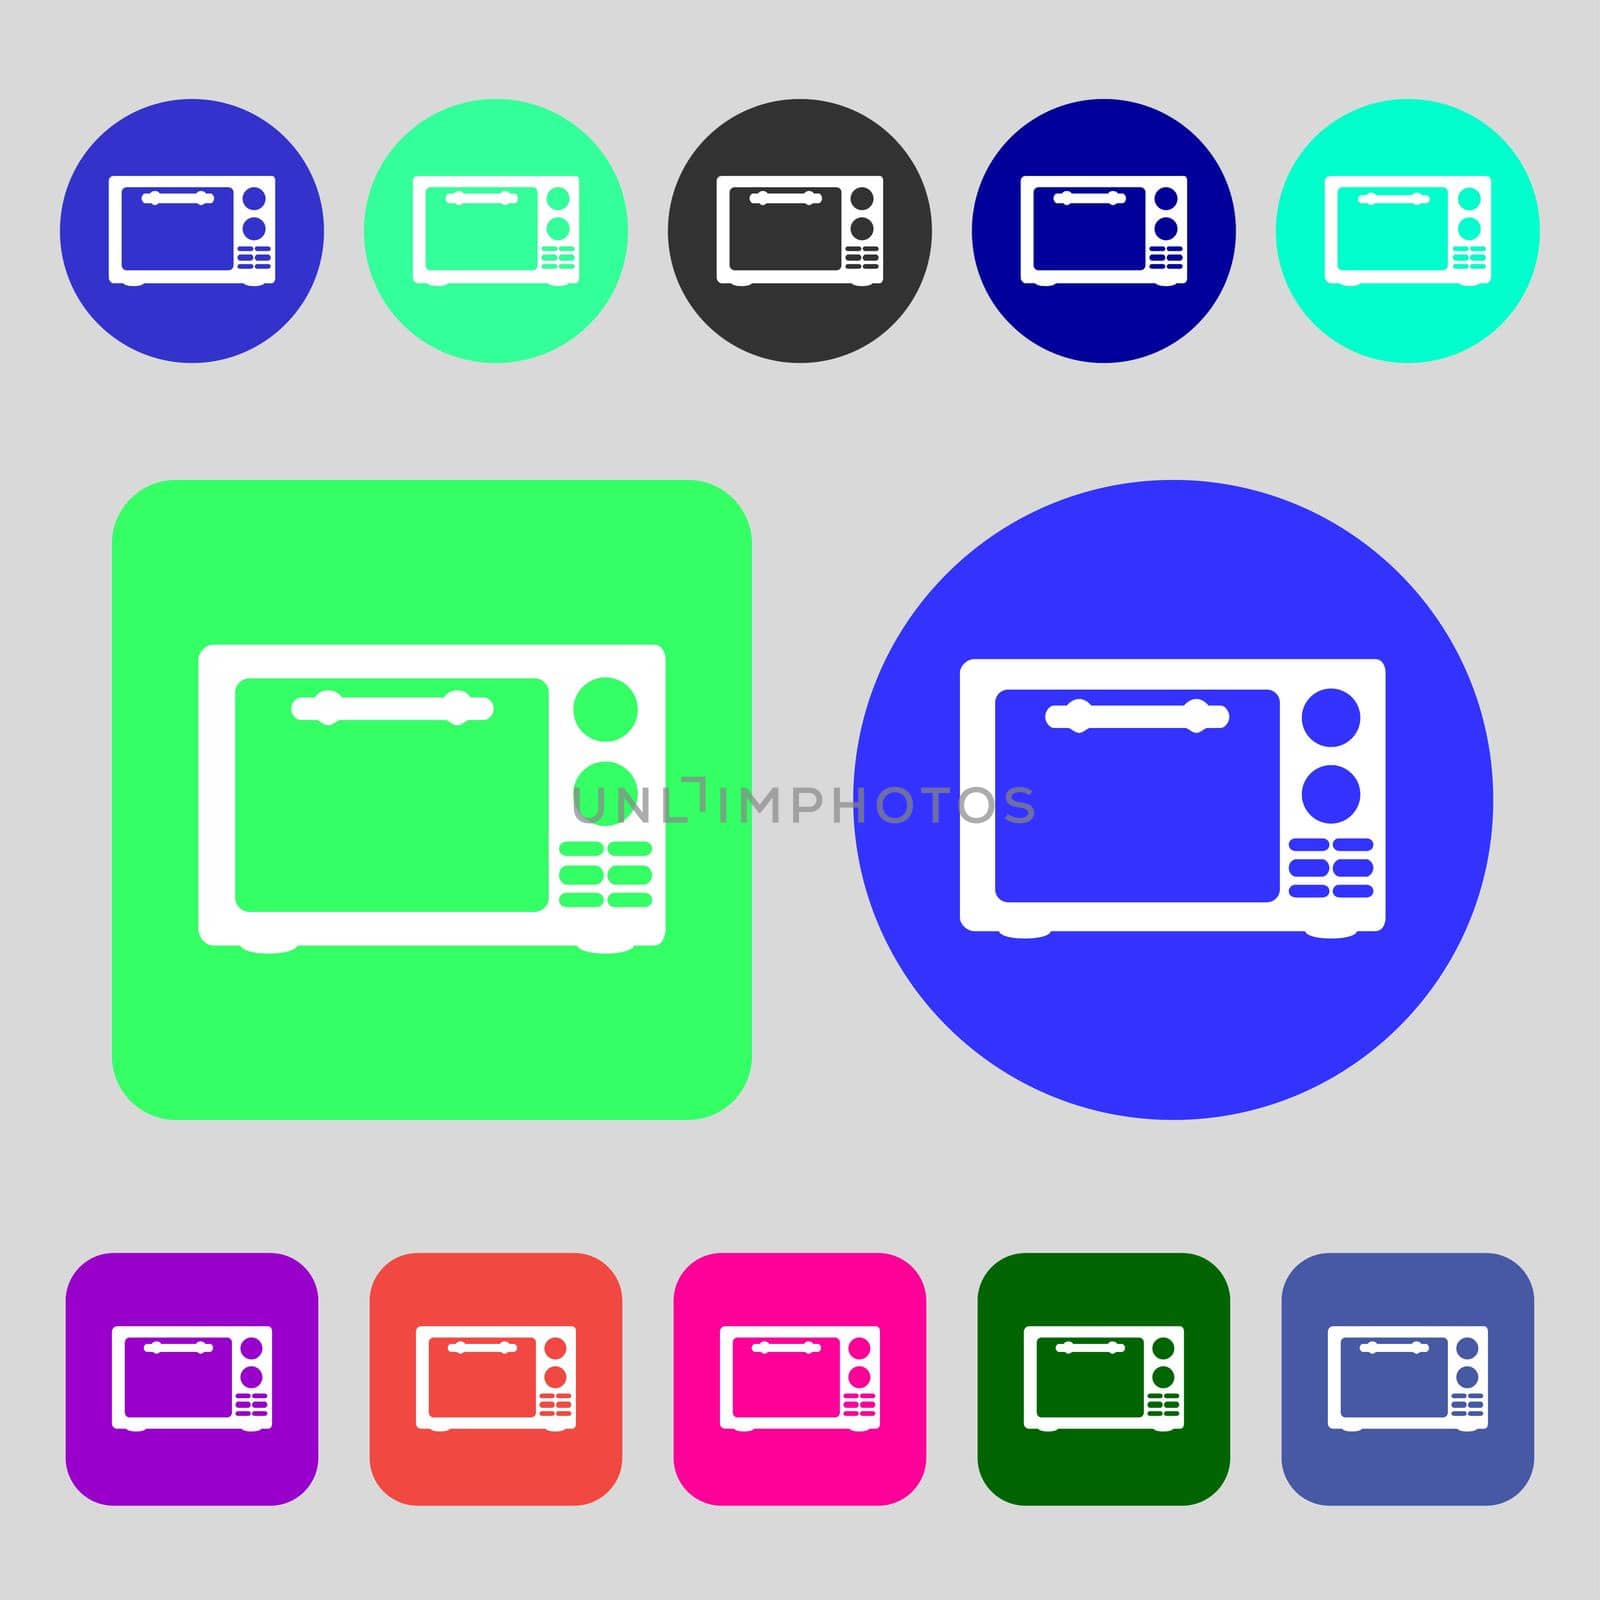 Microwave oven sign icon. Kitchen electric stove symbol.12 colored buttons. Flat design. illustration